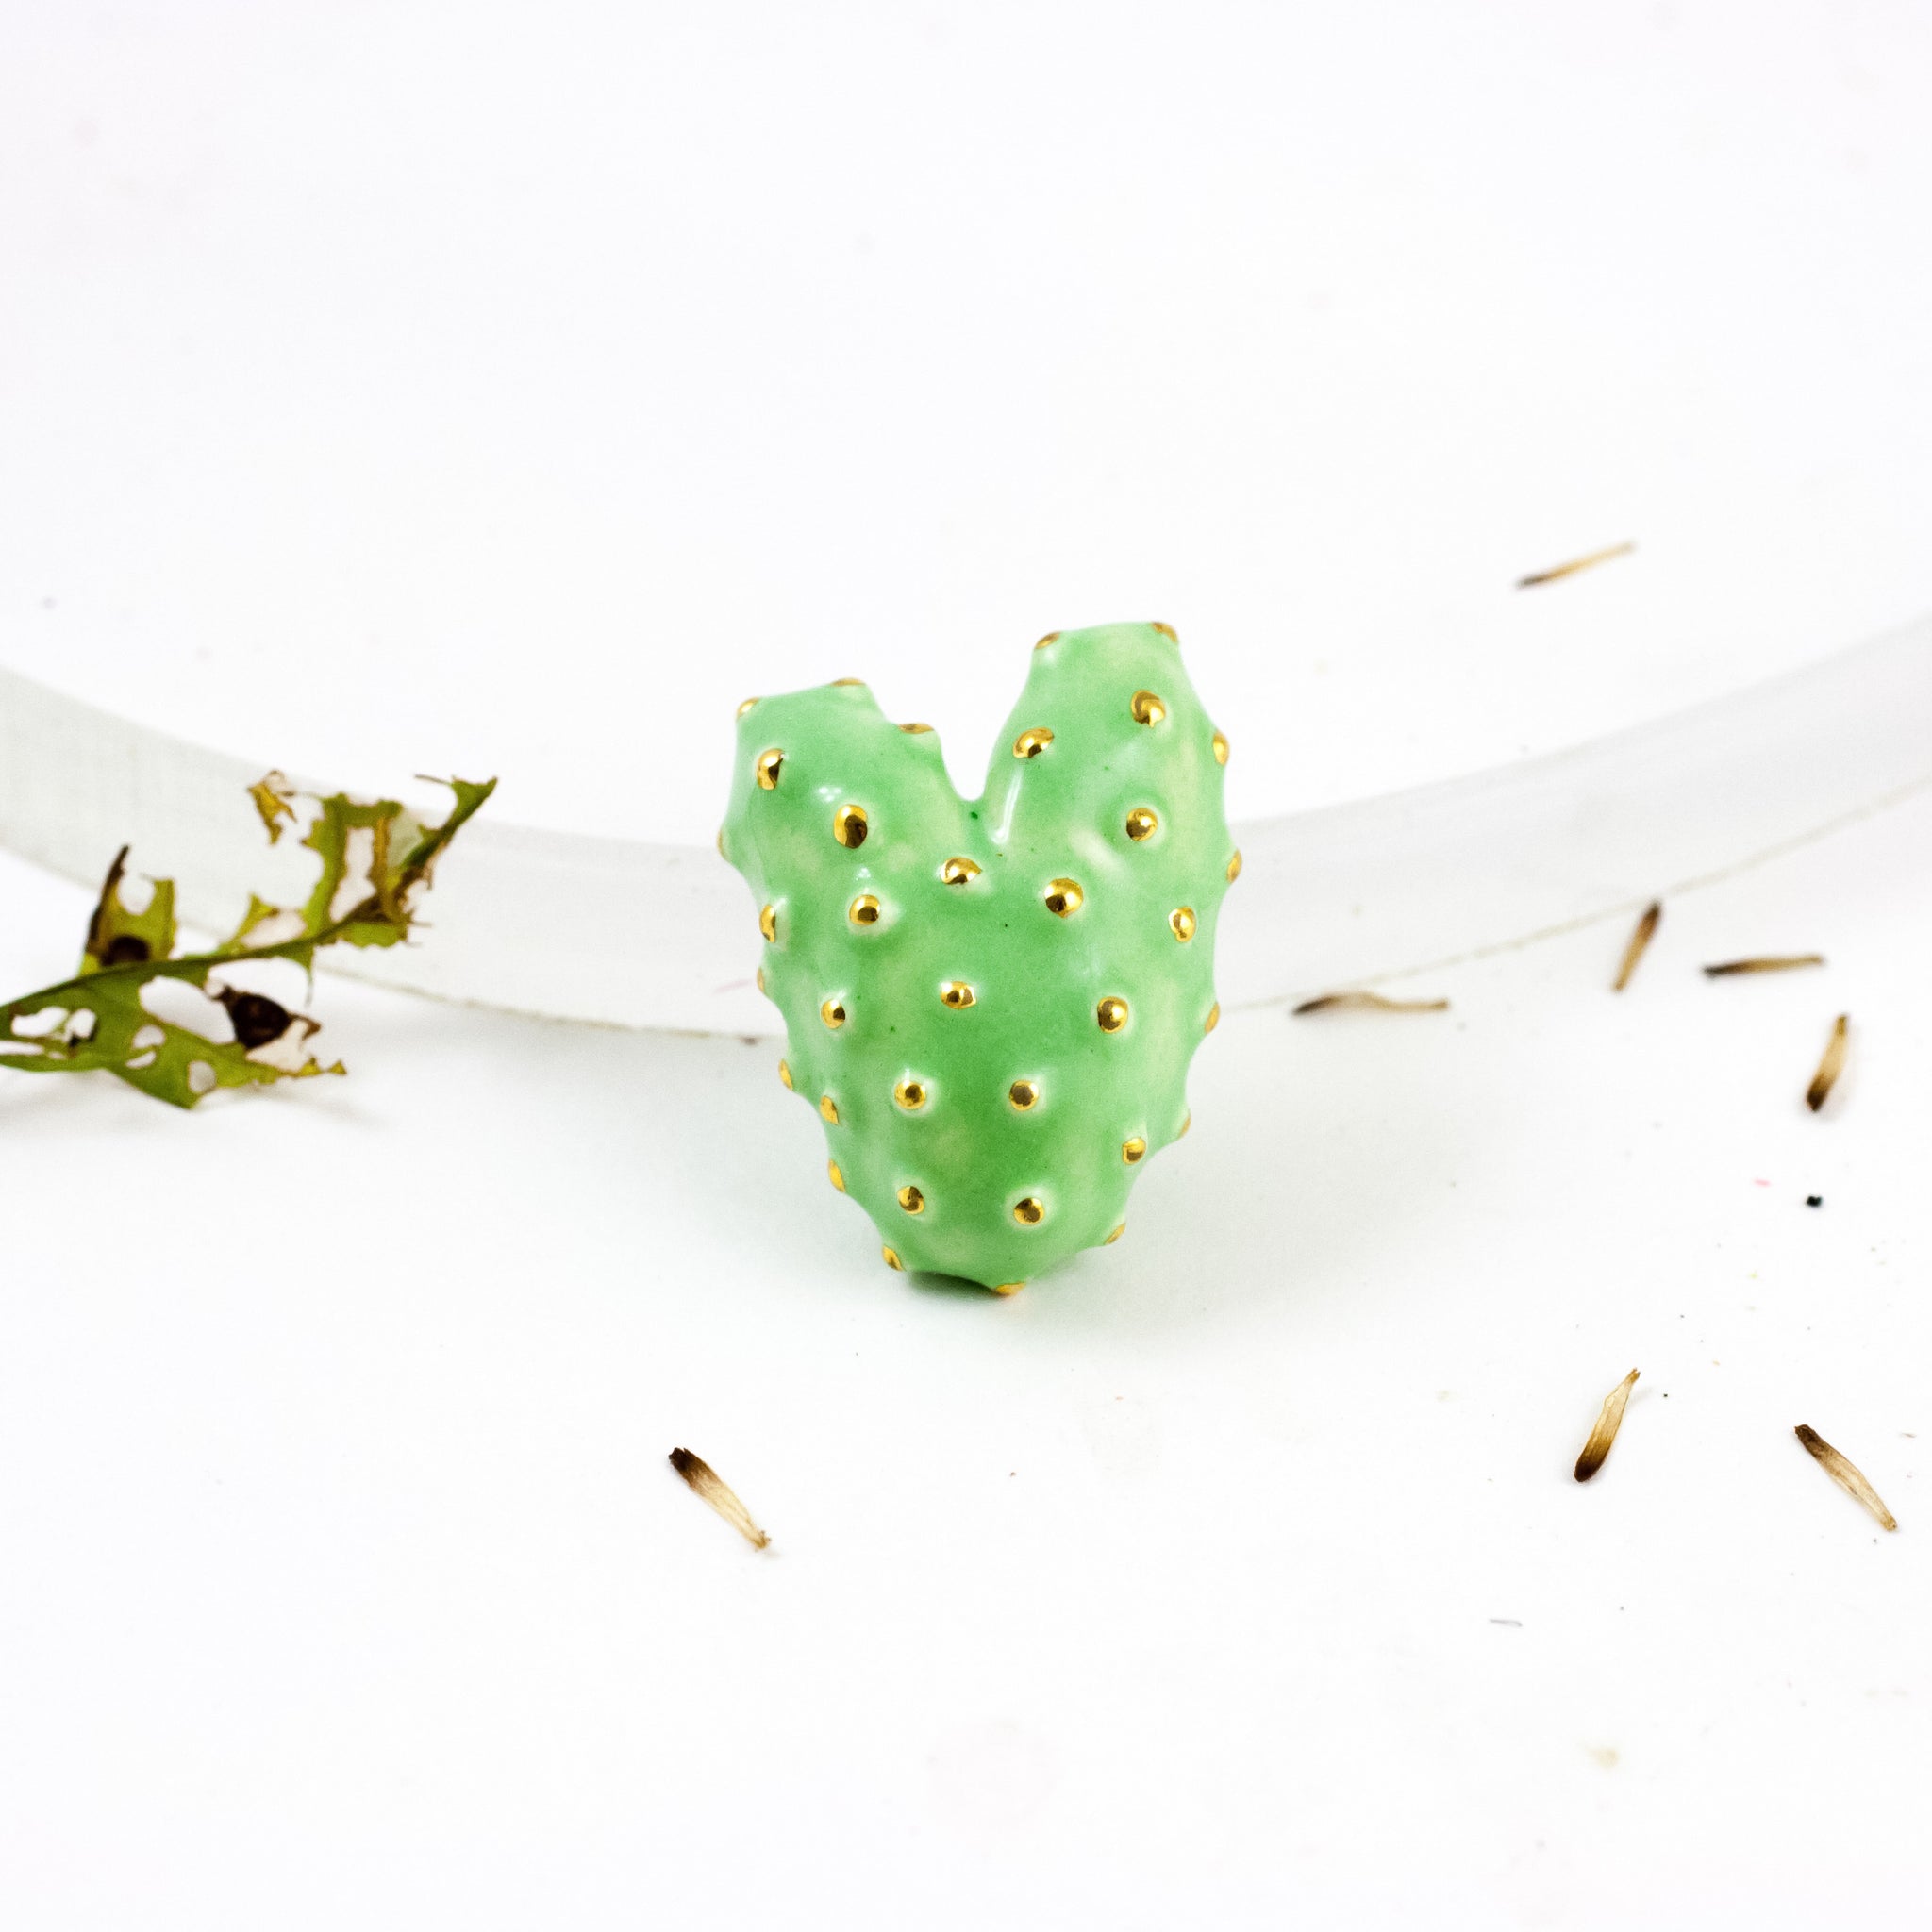 Bright green heart-shaped ceramic brooch with gold luster